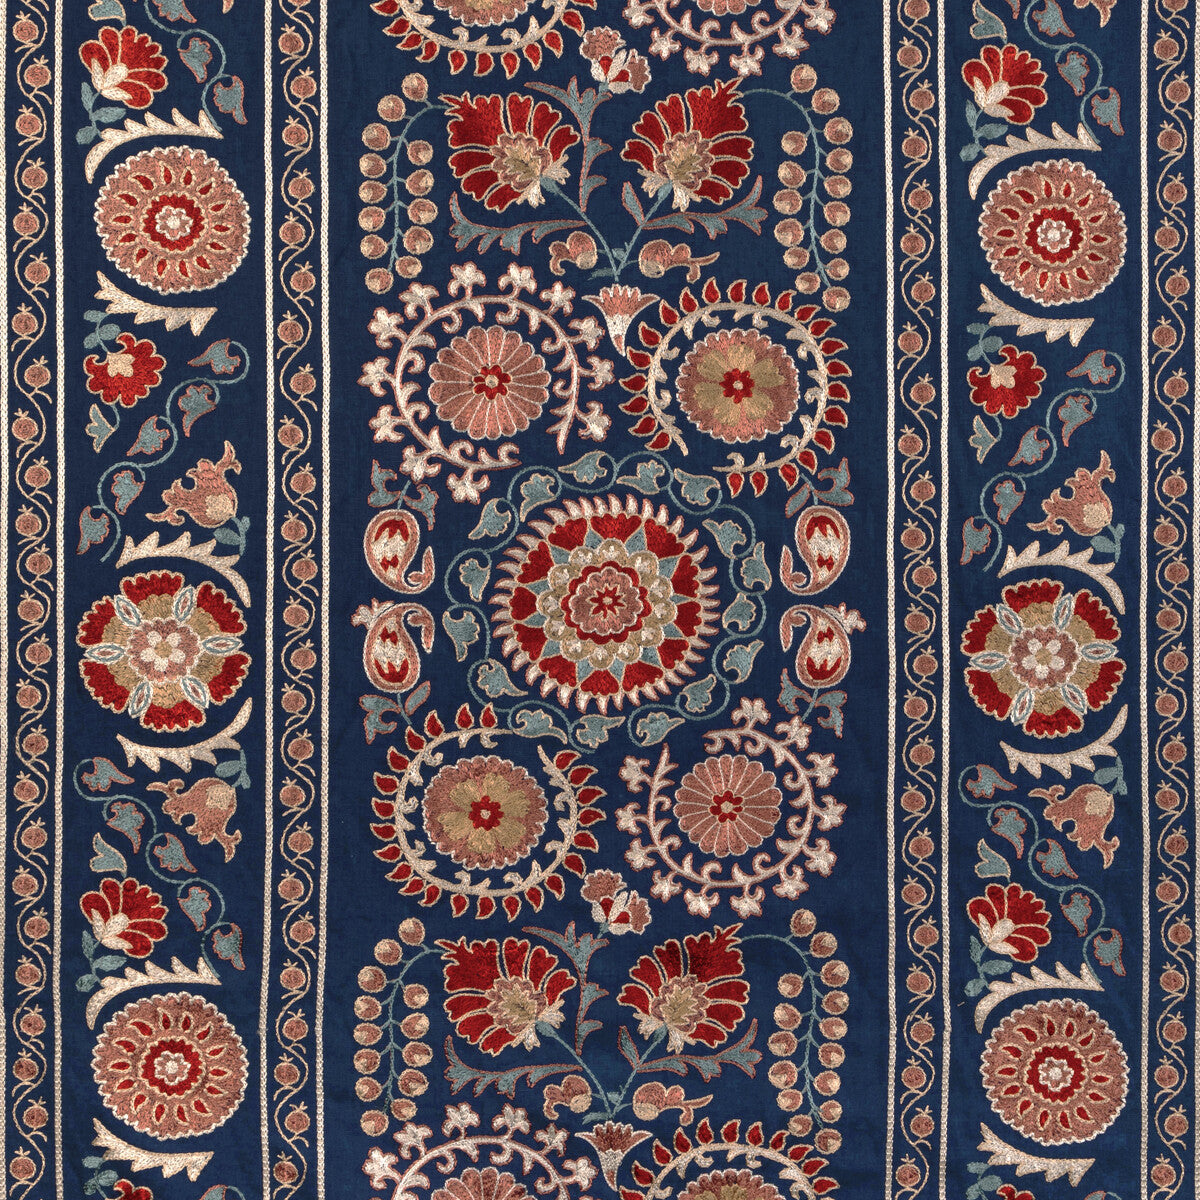 Saanvi Emb fabric in blue/red color - pattern 8023113.195.0 - by Brunschwig &amp; Fils in the Anduze Embroideries collection